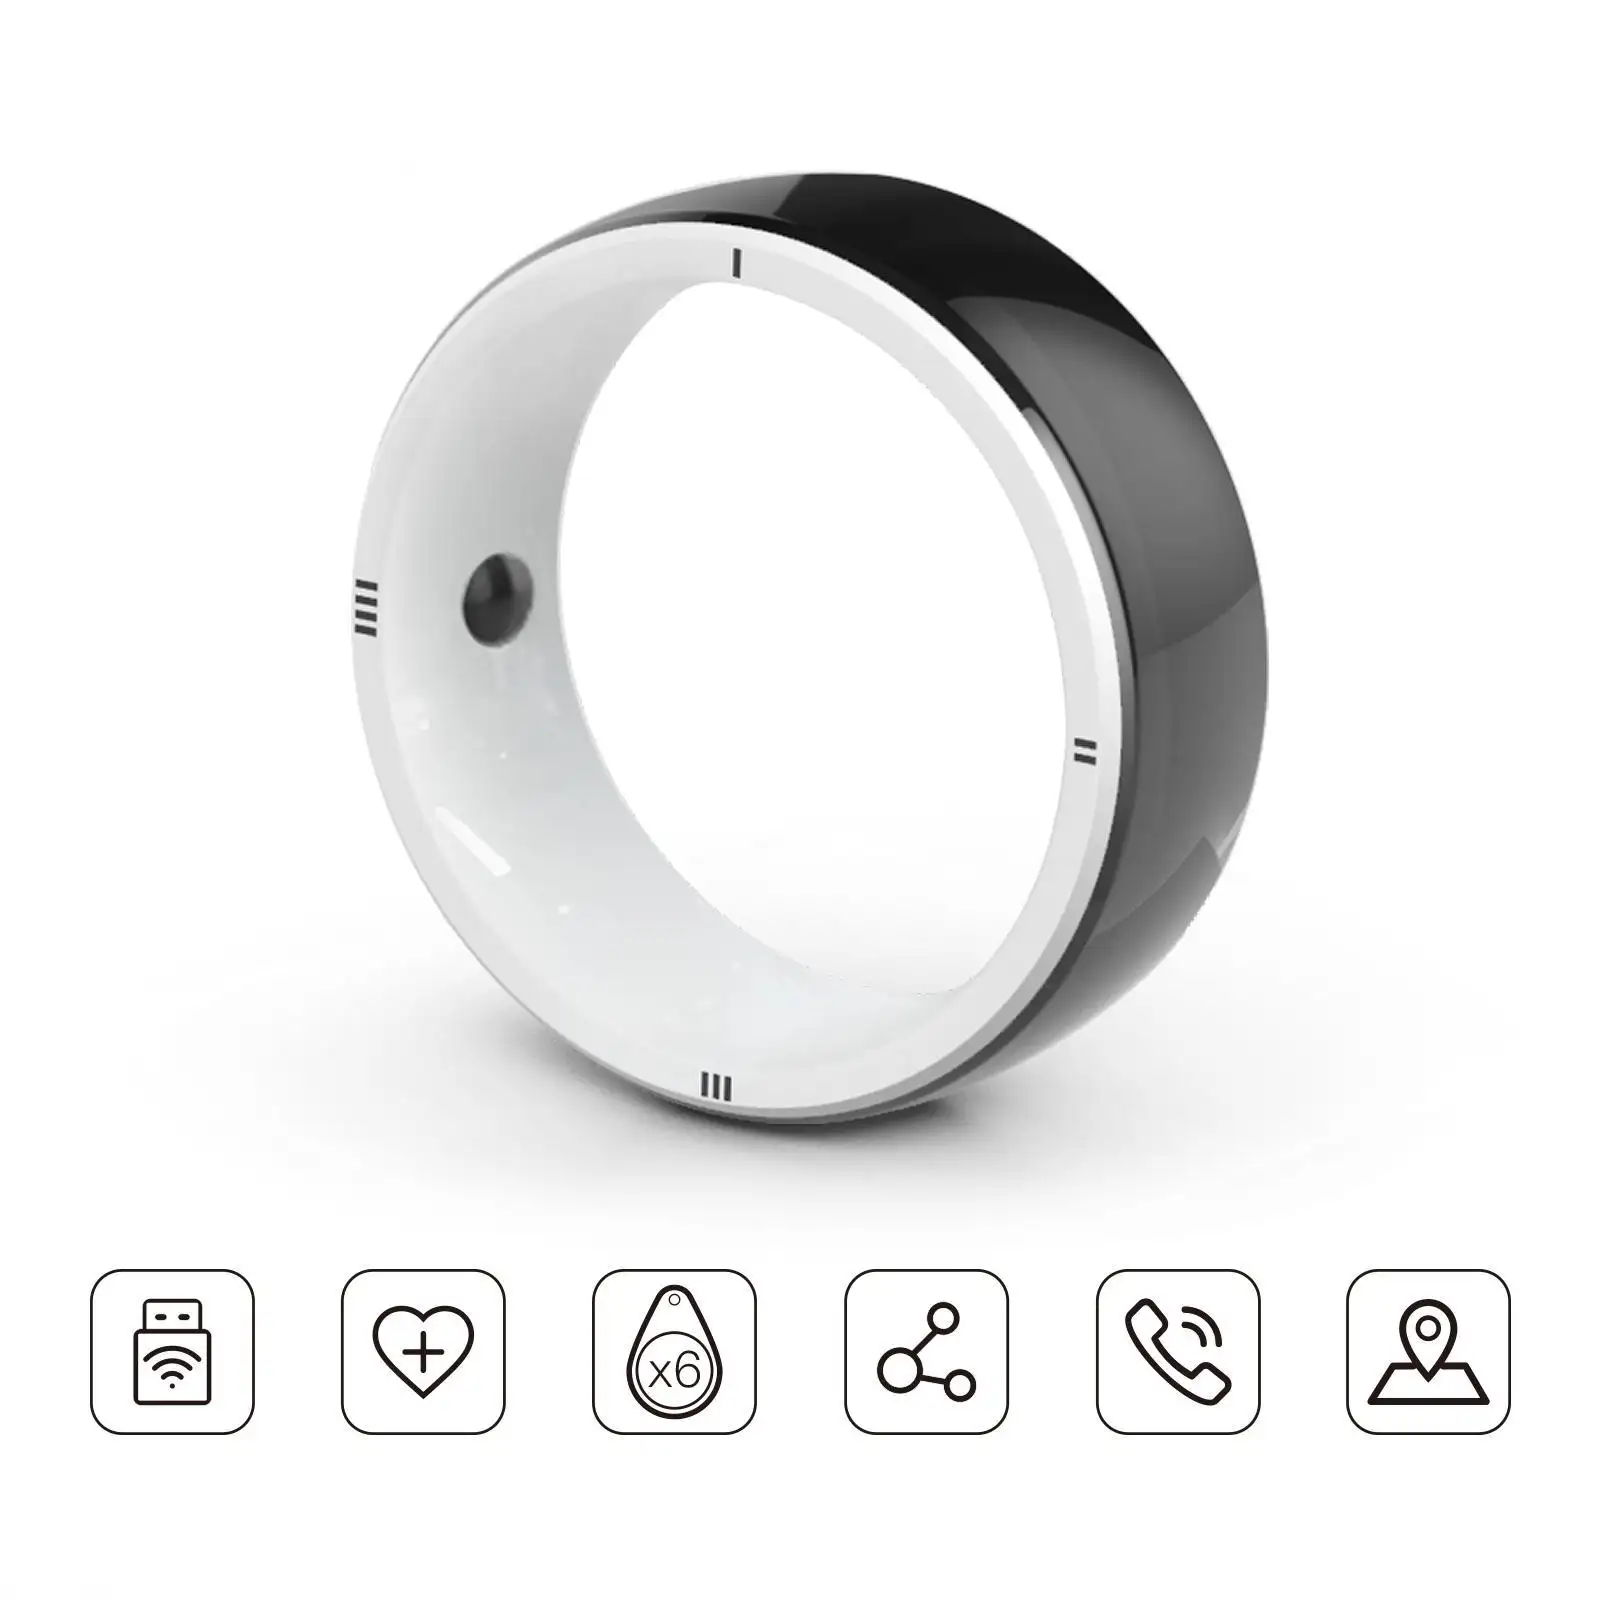 JAKCOM R5 Smart Ring New Smart Ring better than wireless cell booster for home full movie best processor diy hand sanitizer